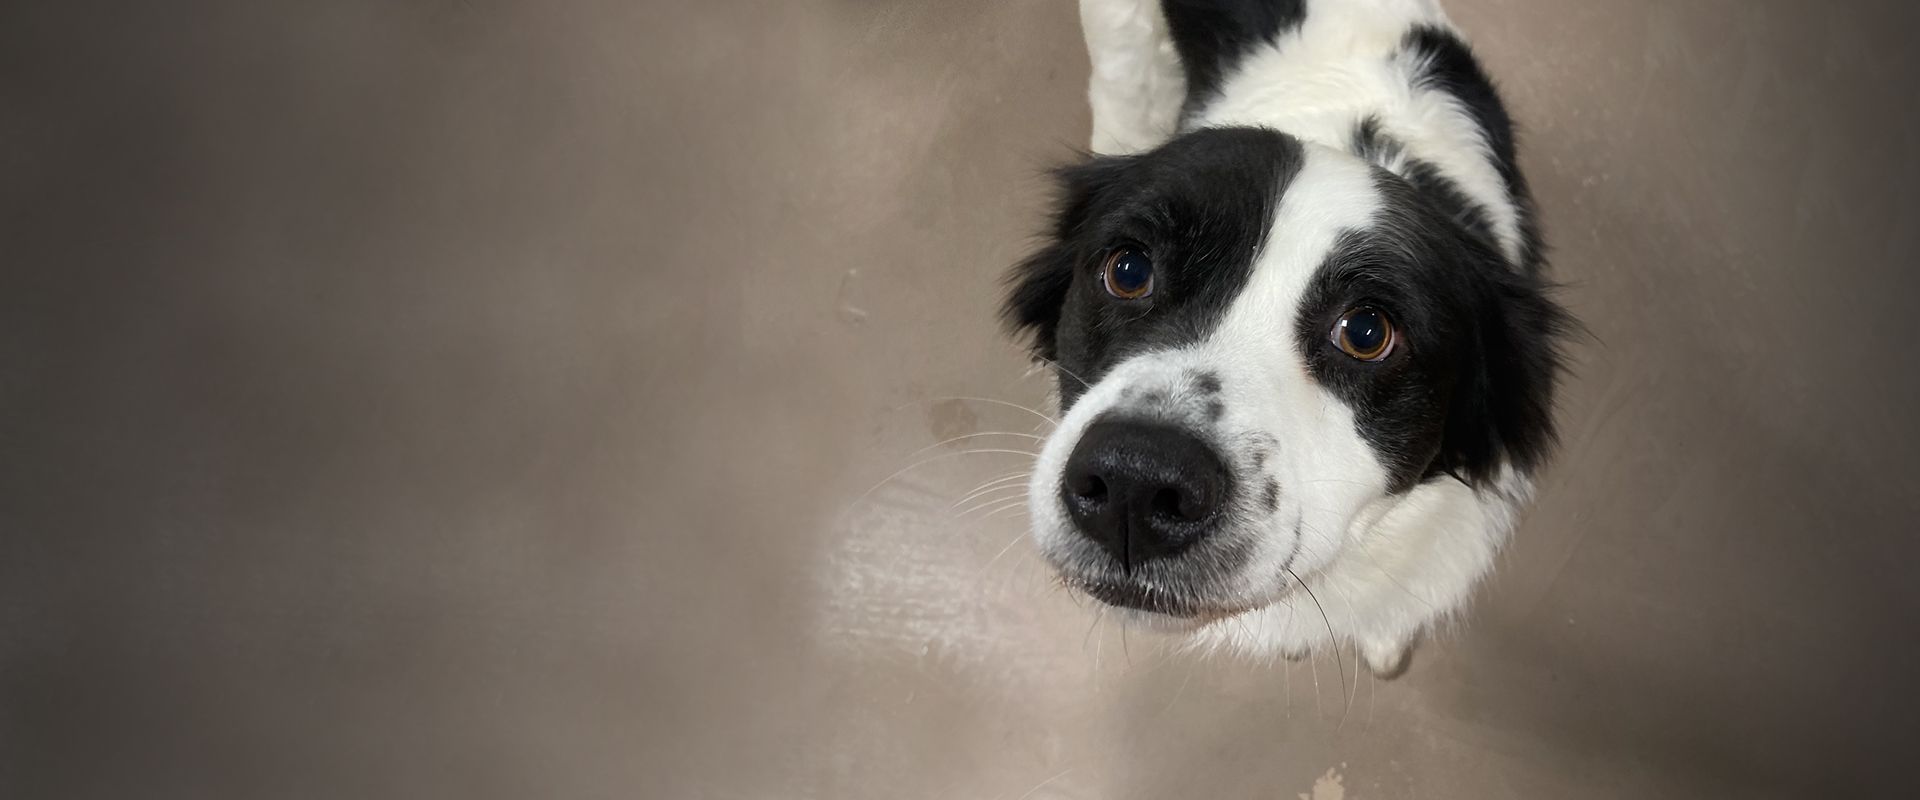 adorable black and white dog looking at the camera at woof pet resort